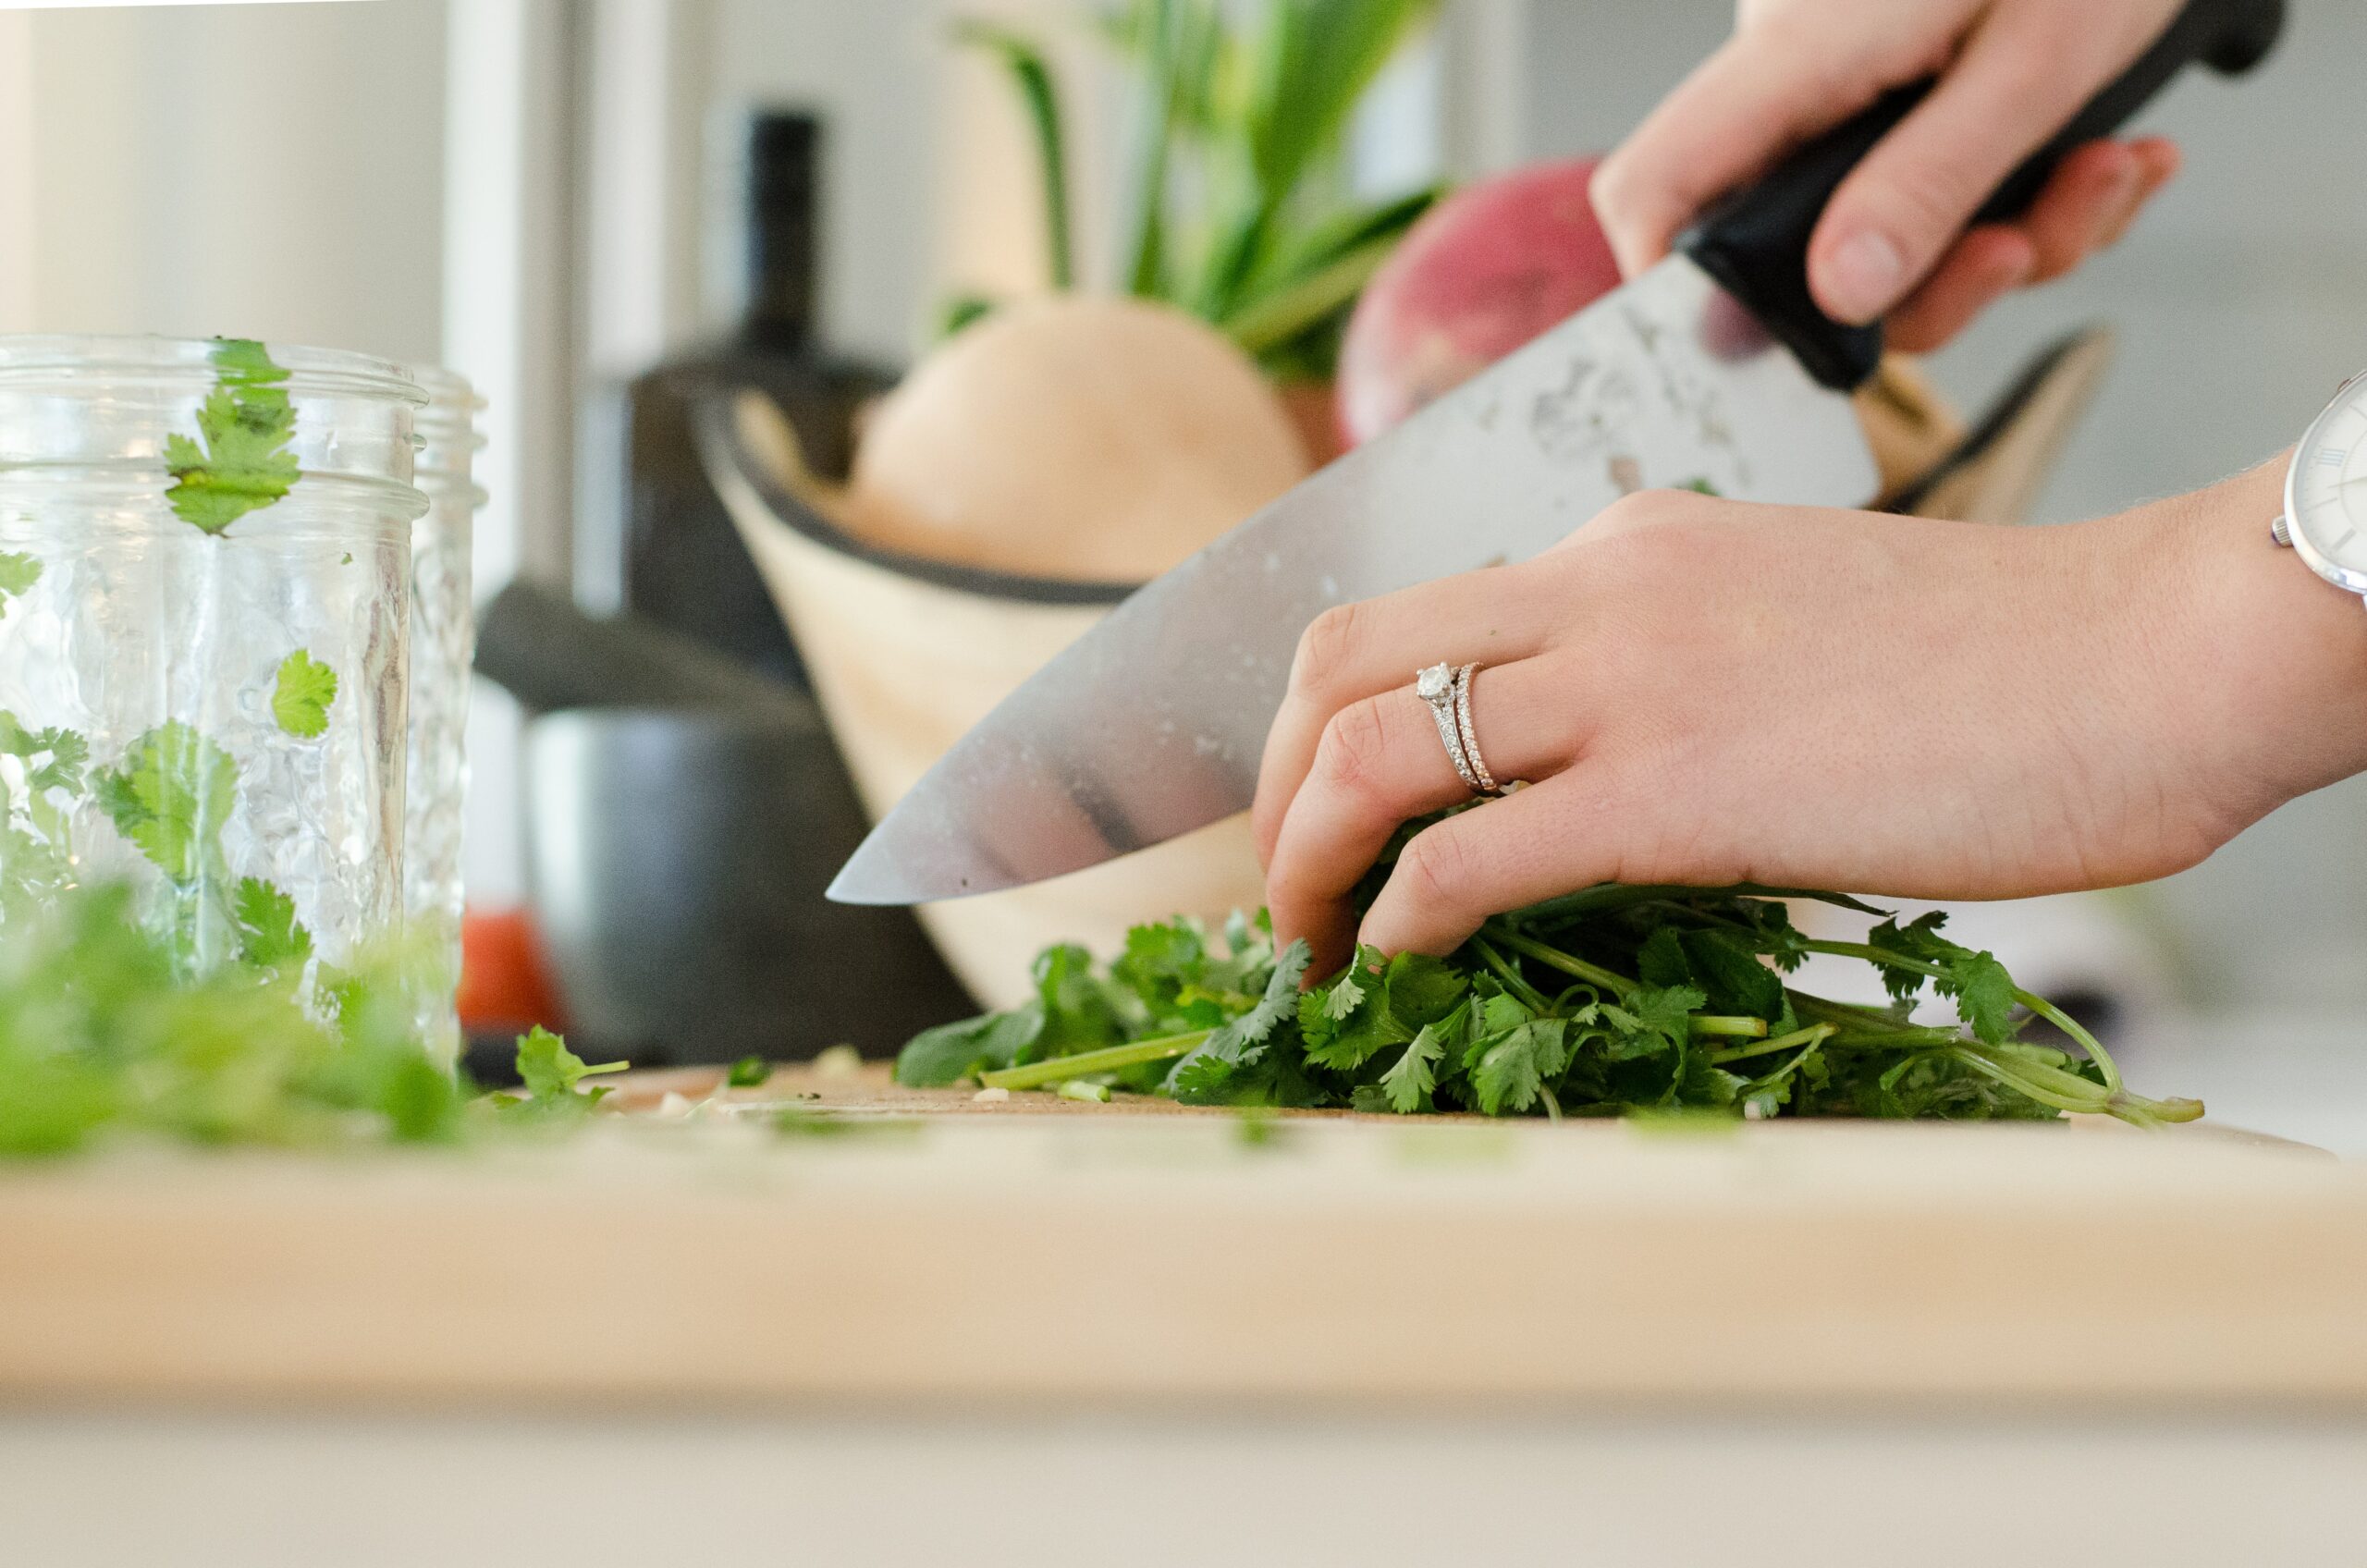 How to Digitally Enhance Your Cooking Experience